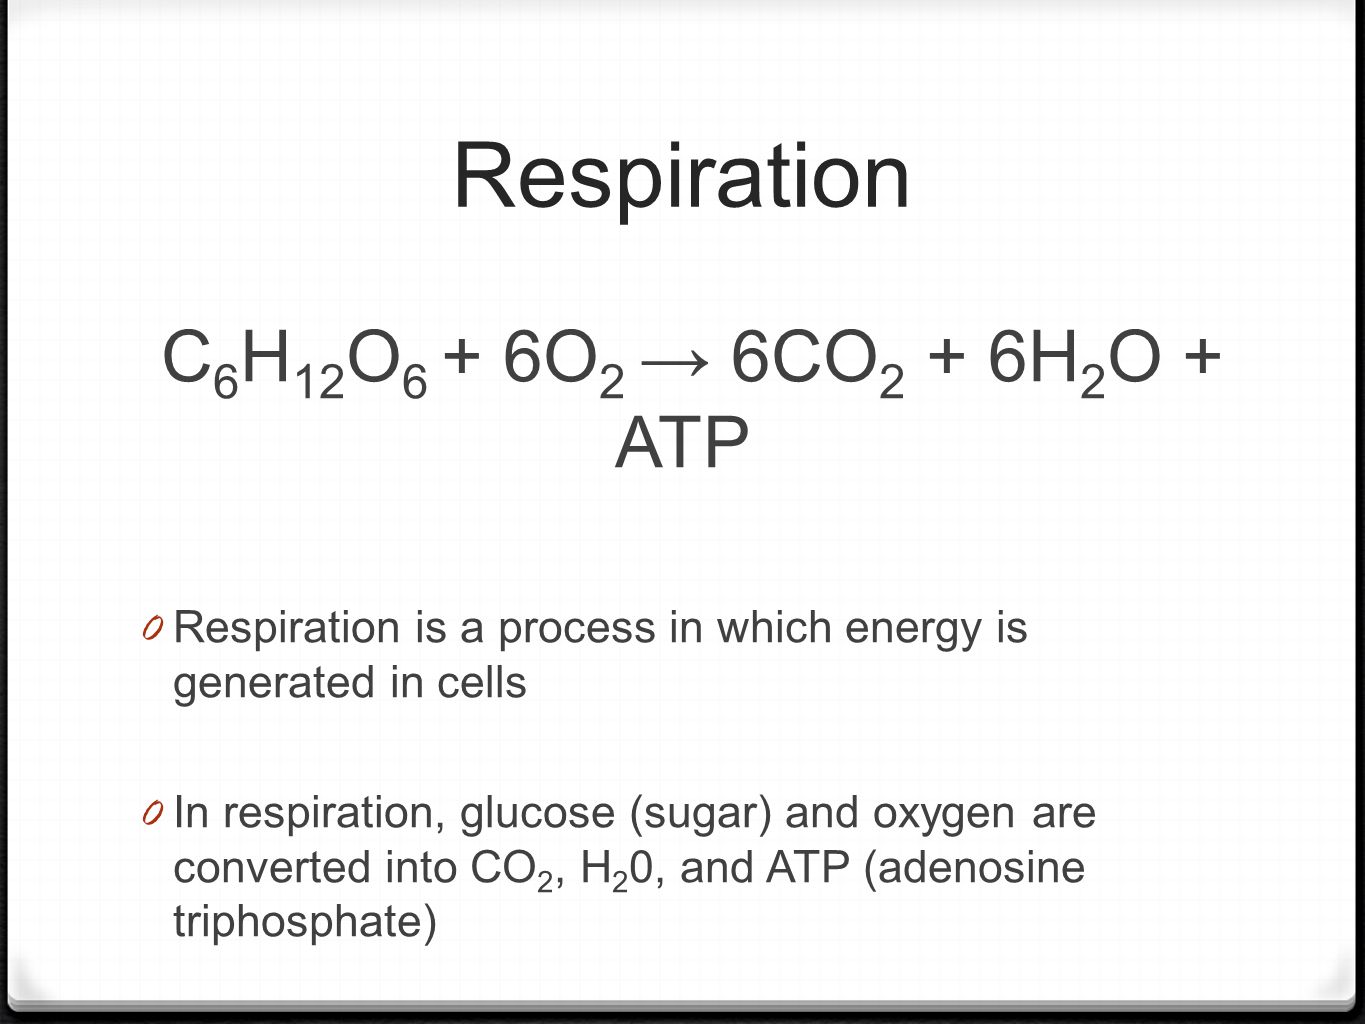 Respiration C 6 H 12 O 6 + 6O 2 → 6CO 2 + 6H 2 O + ATP 0 Respiration is a process in which energy is generated in cells 0 In respiration, glucose (sugar) and oxygen are converted into CO 2, H 2 0, and ATP (adenosine triphosphate) 0 Respiration takes places in the mitochondrion of both plant and animal cells